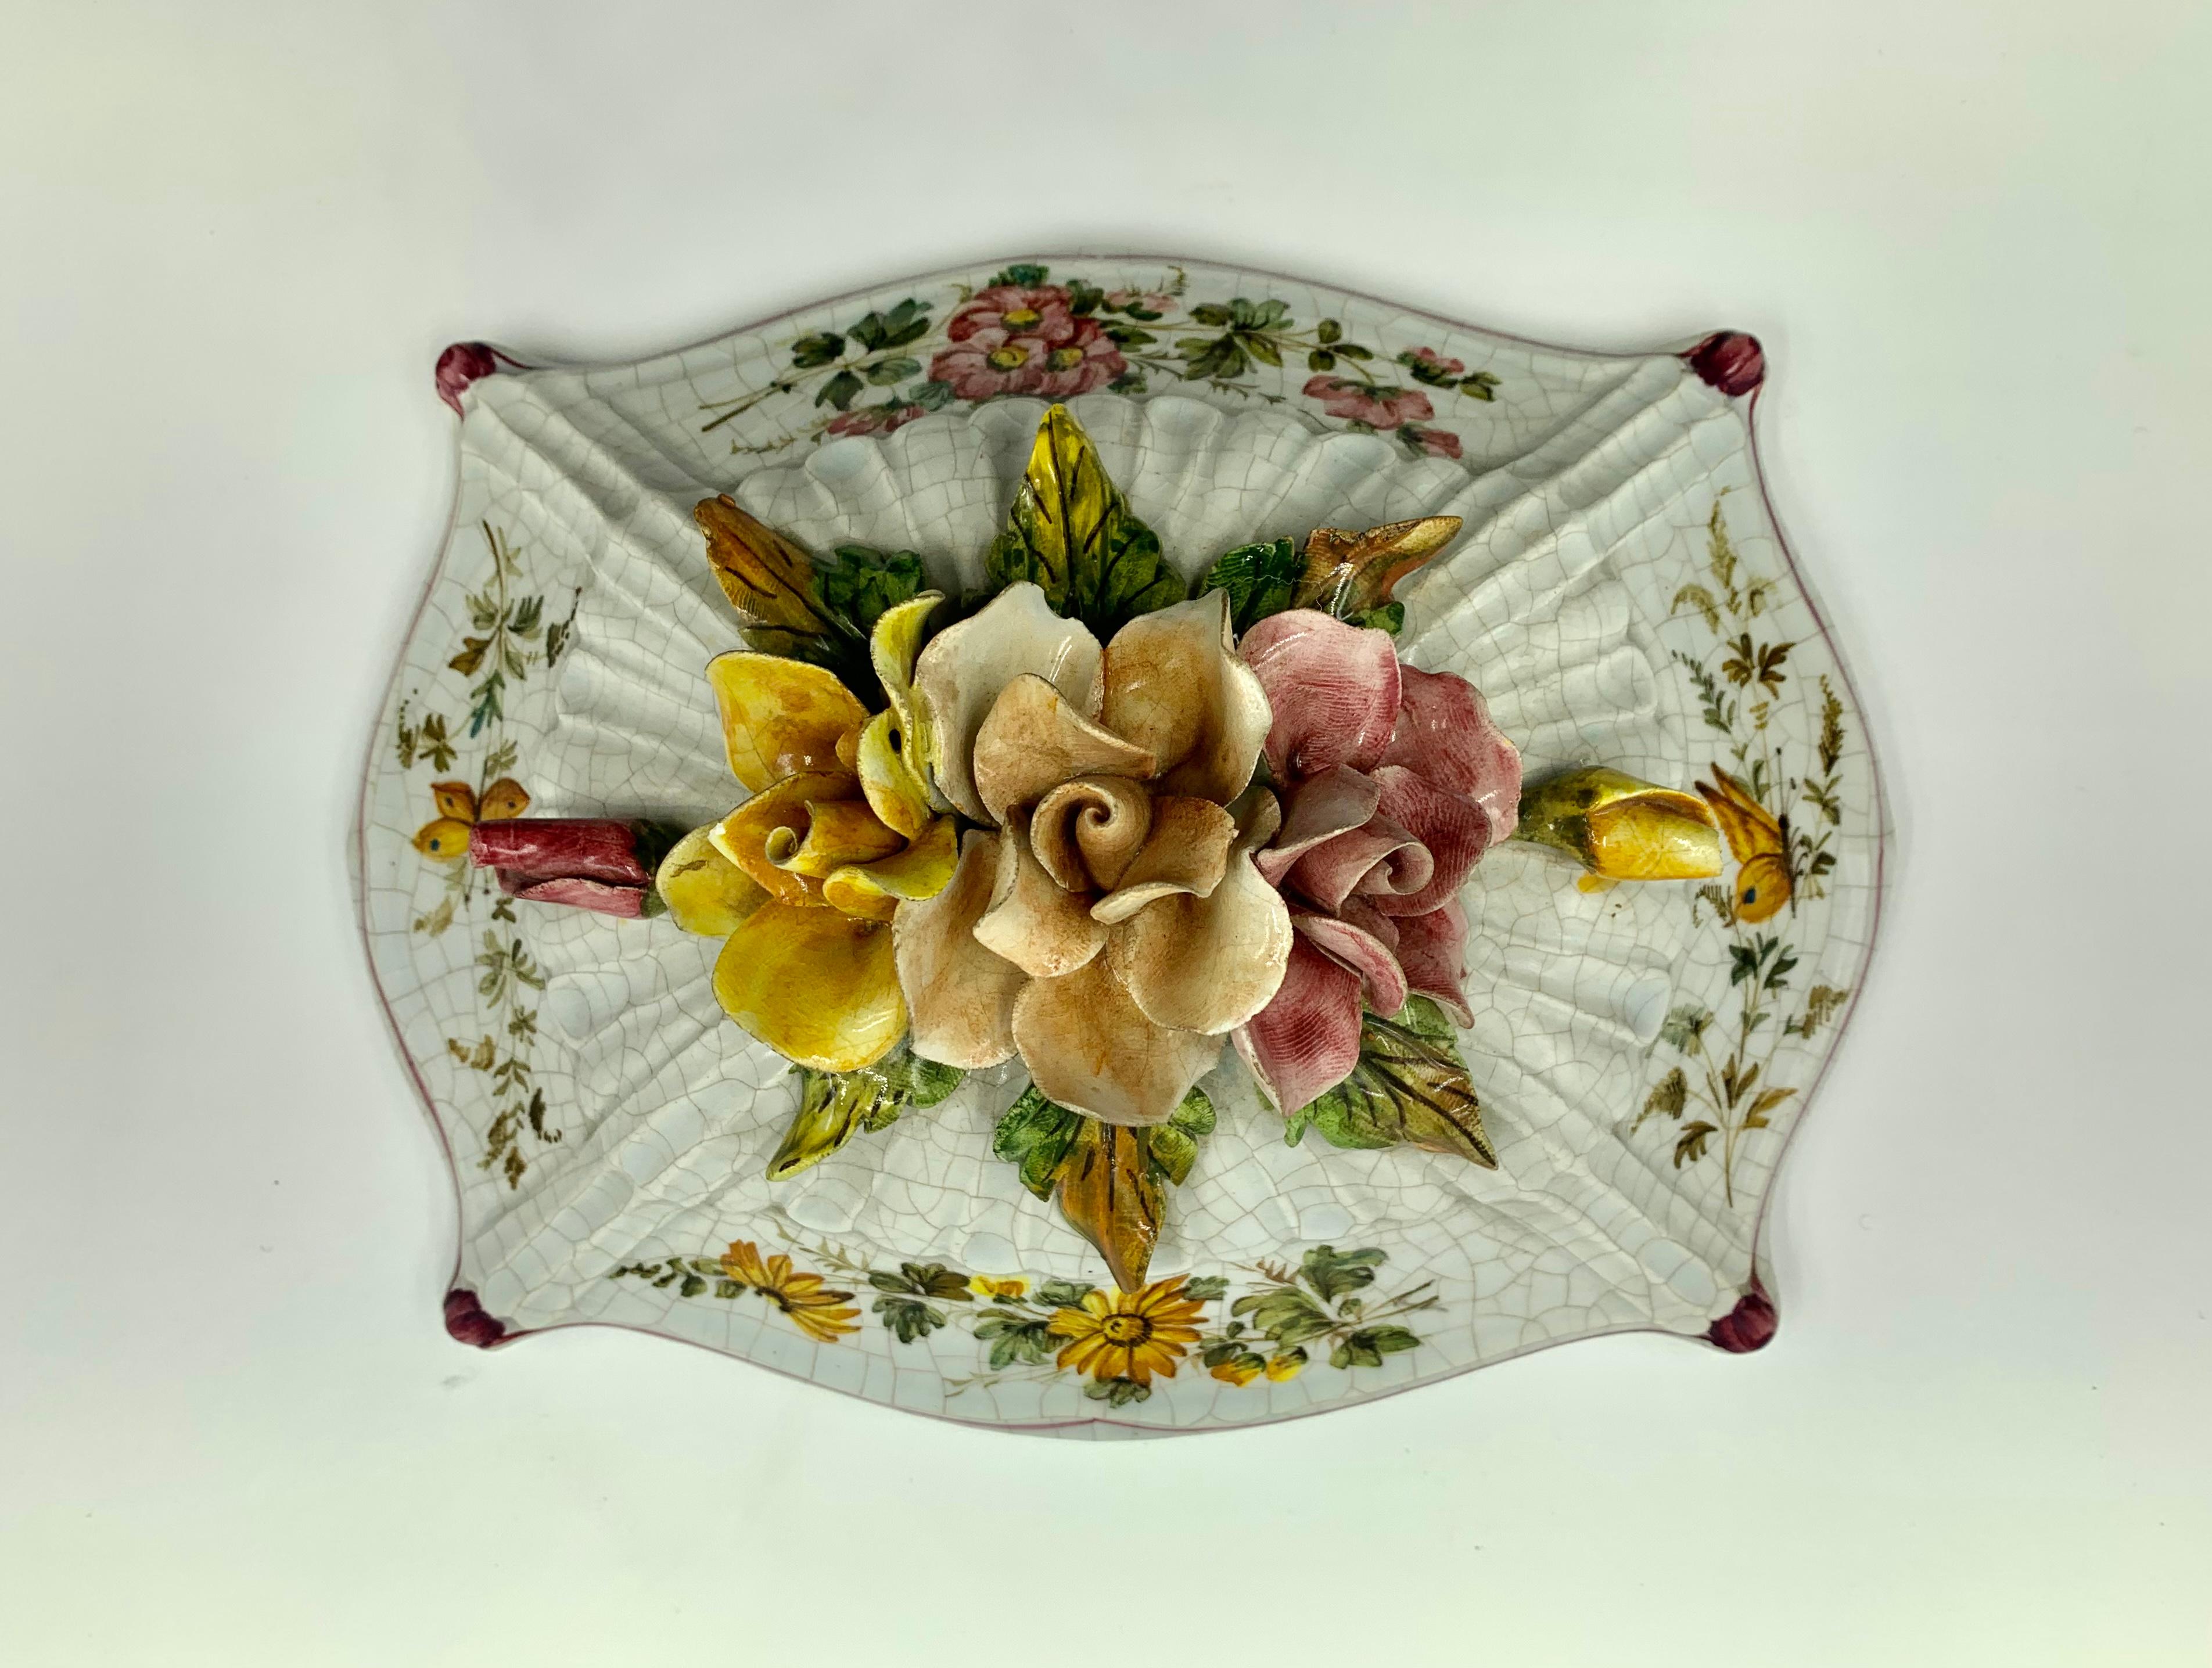 Beautiful, large French Provincial style faience covered box profusely decorated with vibrant bouquets of flowers against a marvelous craquelure background. The cover topped with five roses, three in full bloom and two buds in apricot, yellow and